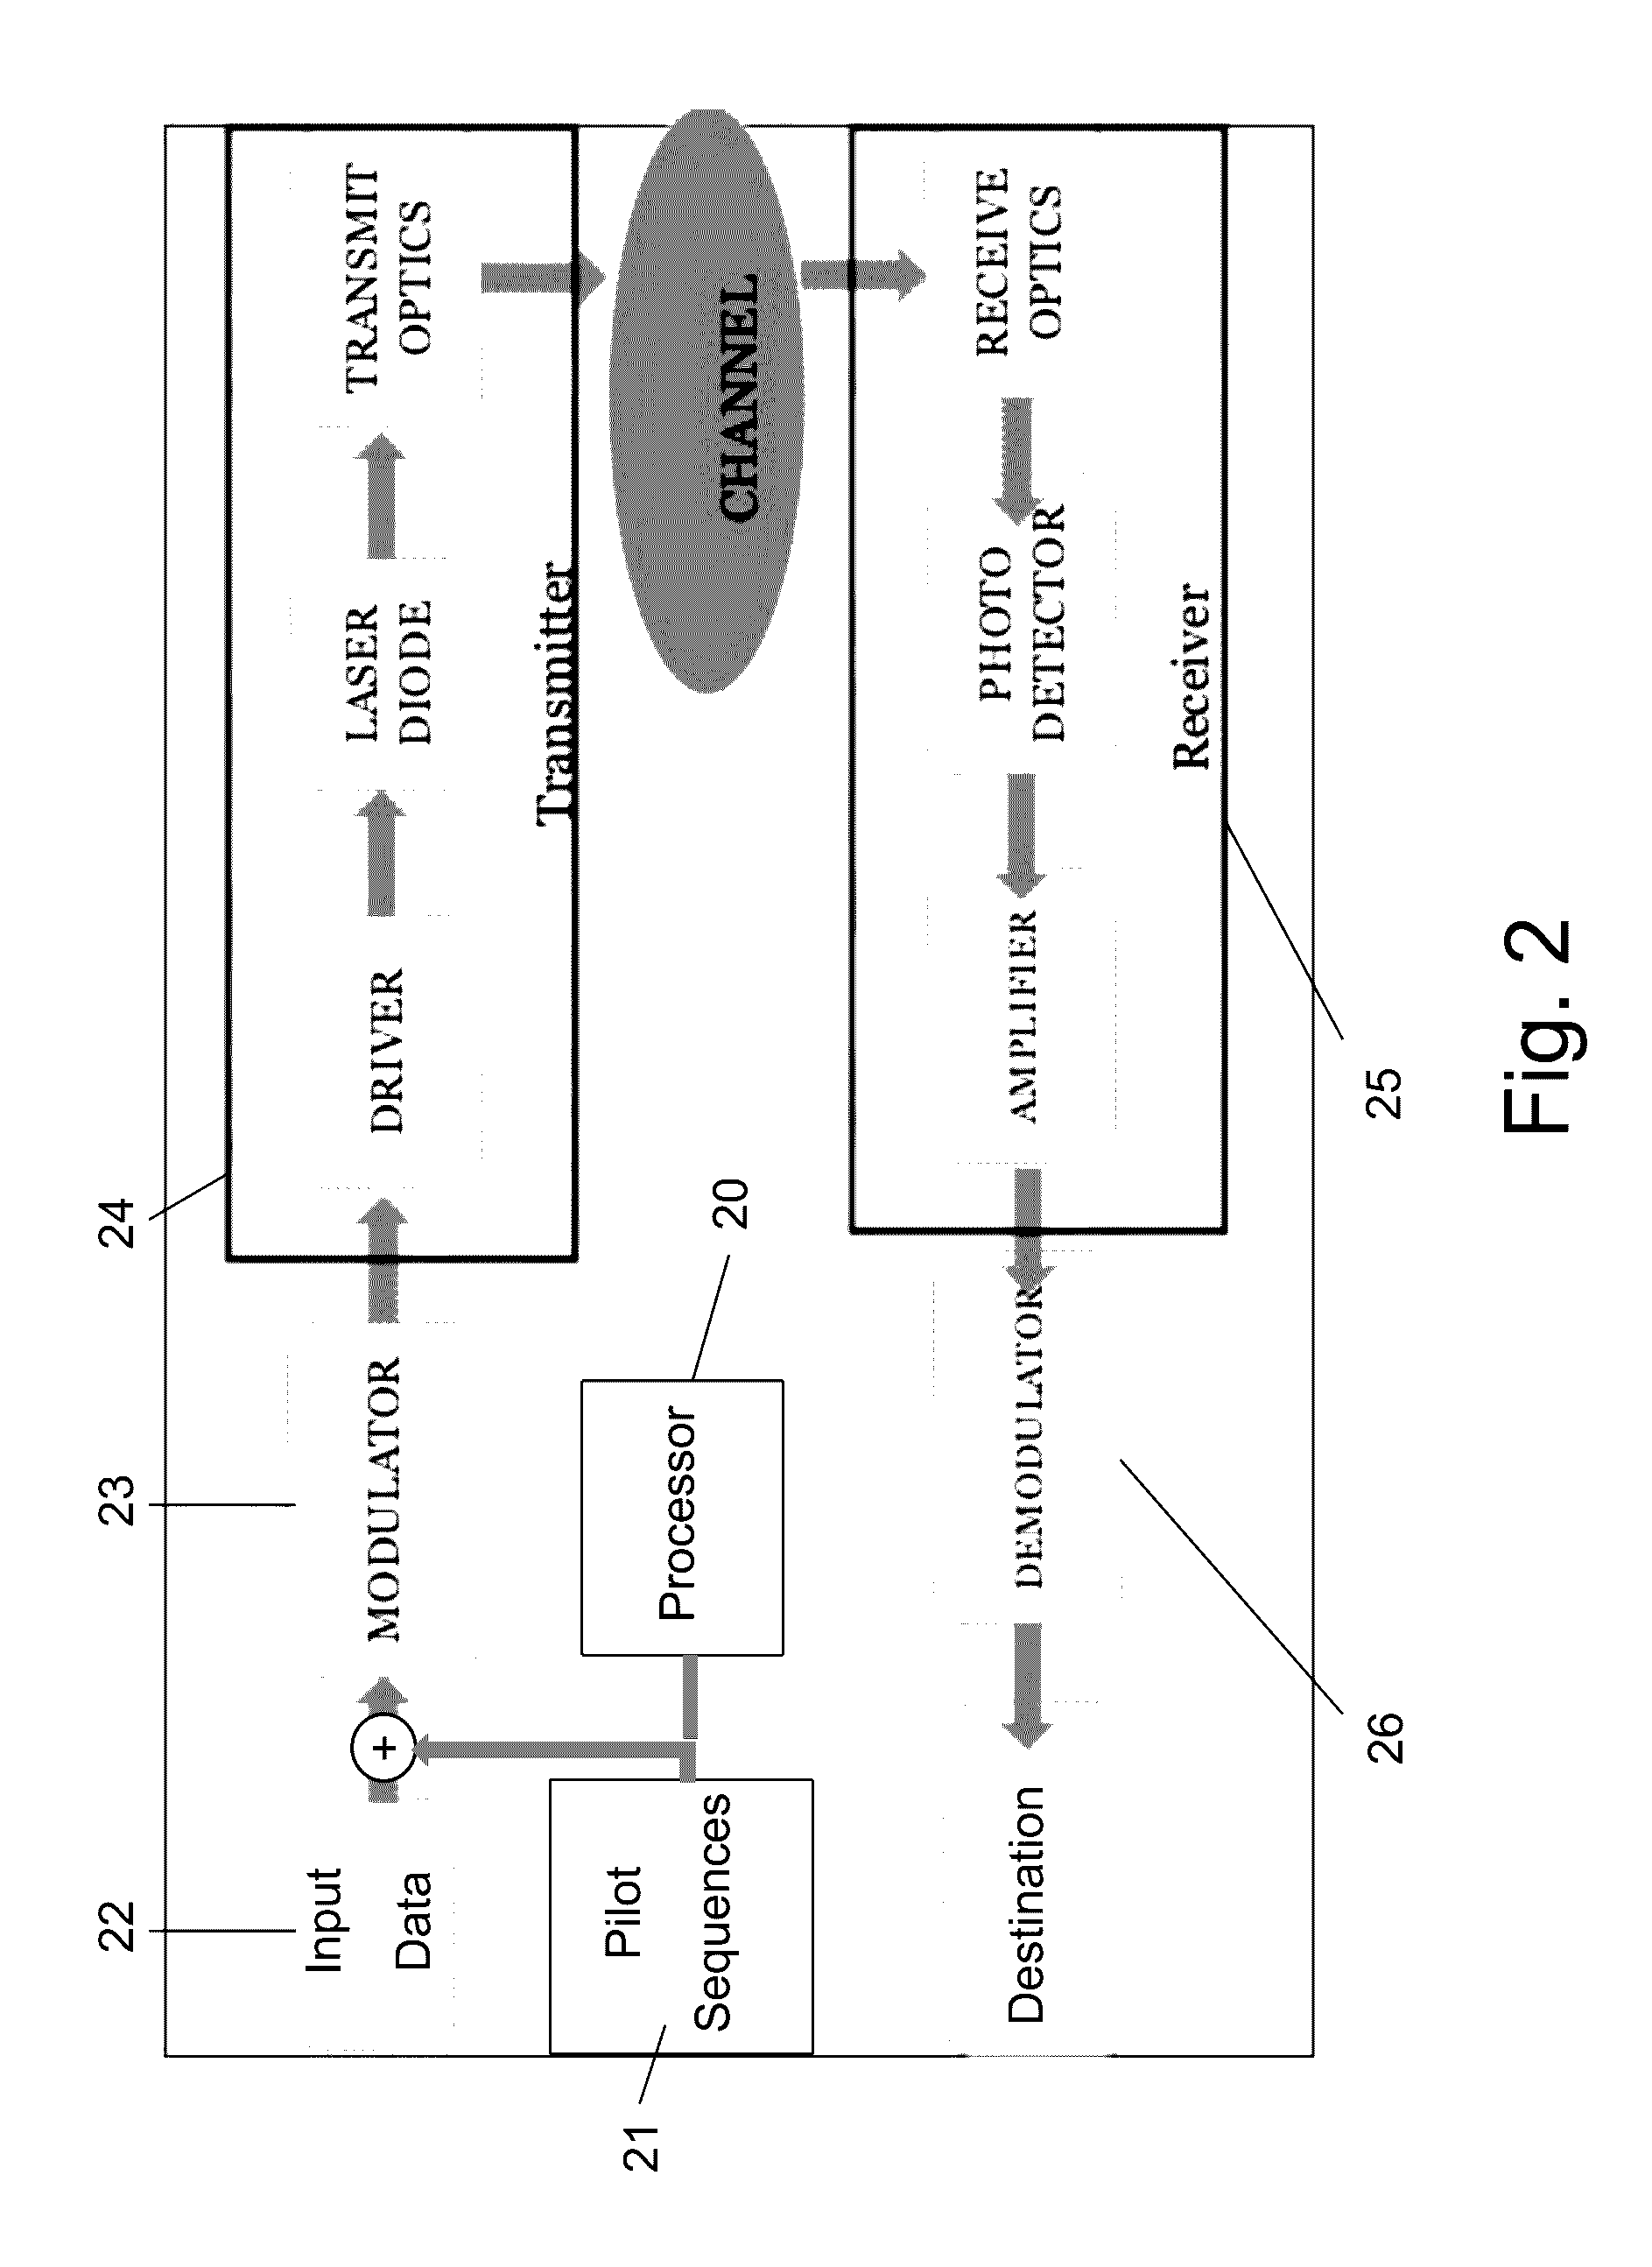 Framing scheme for continuous optical transmission systems